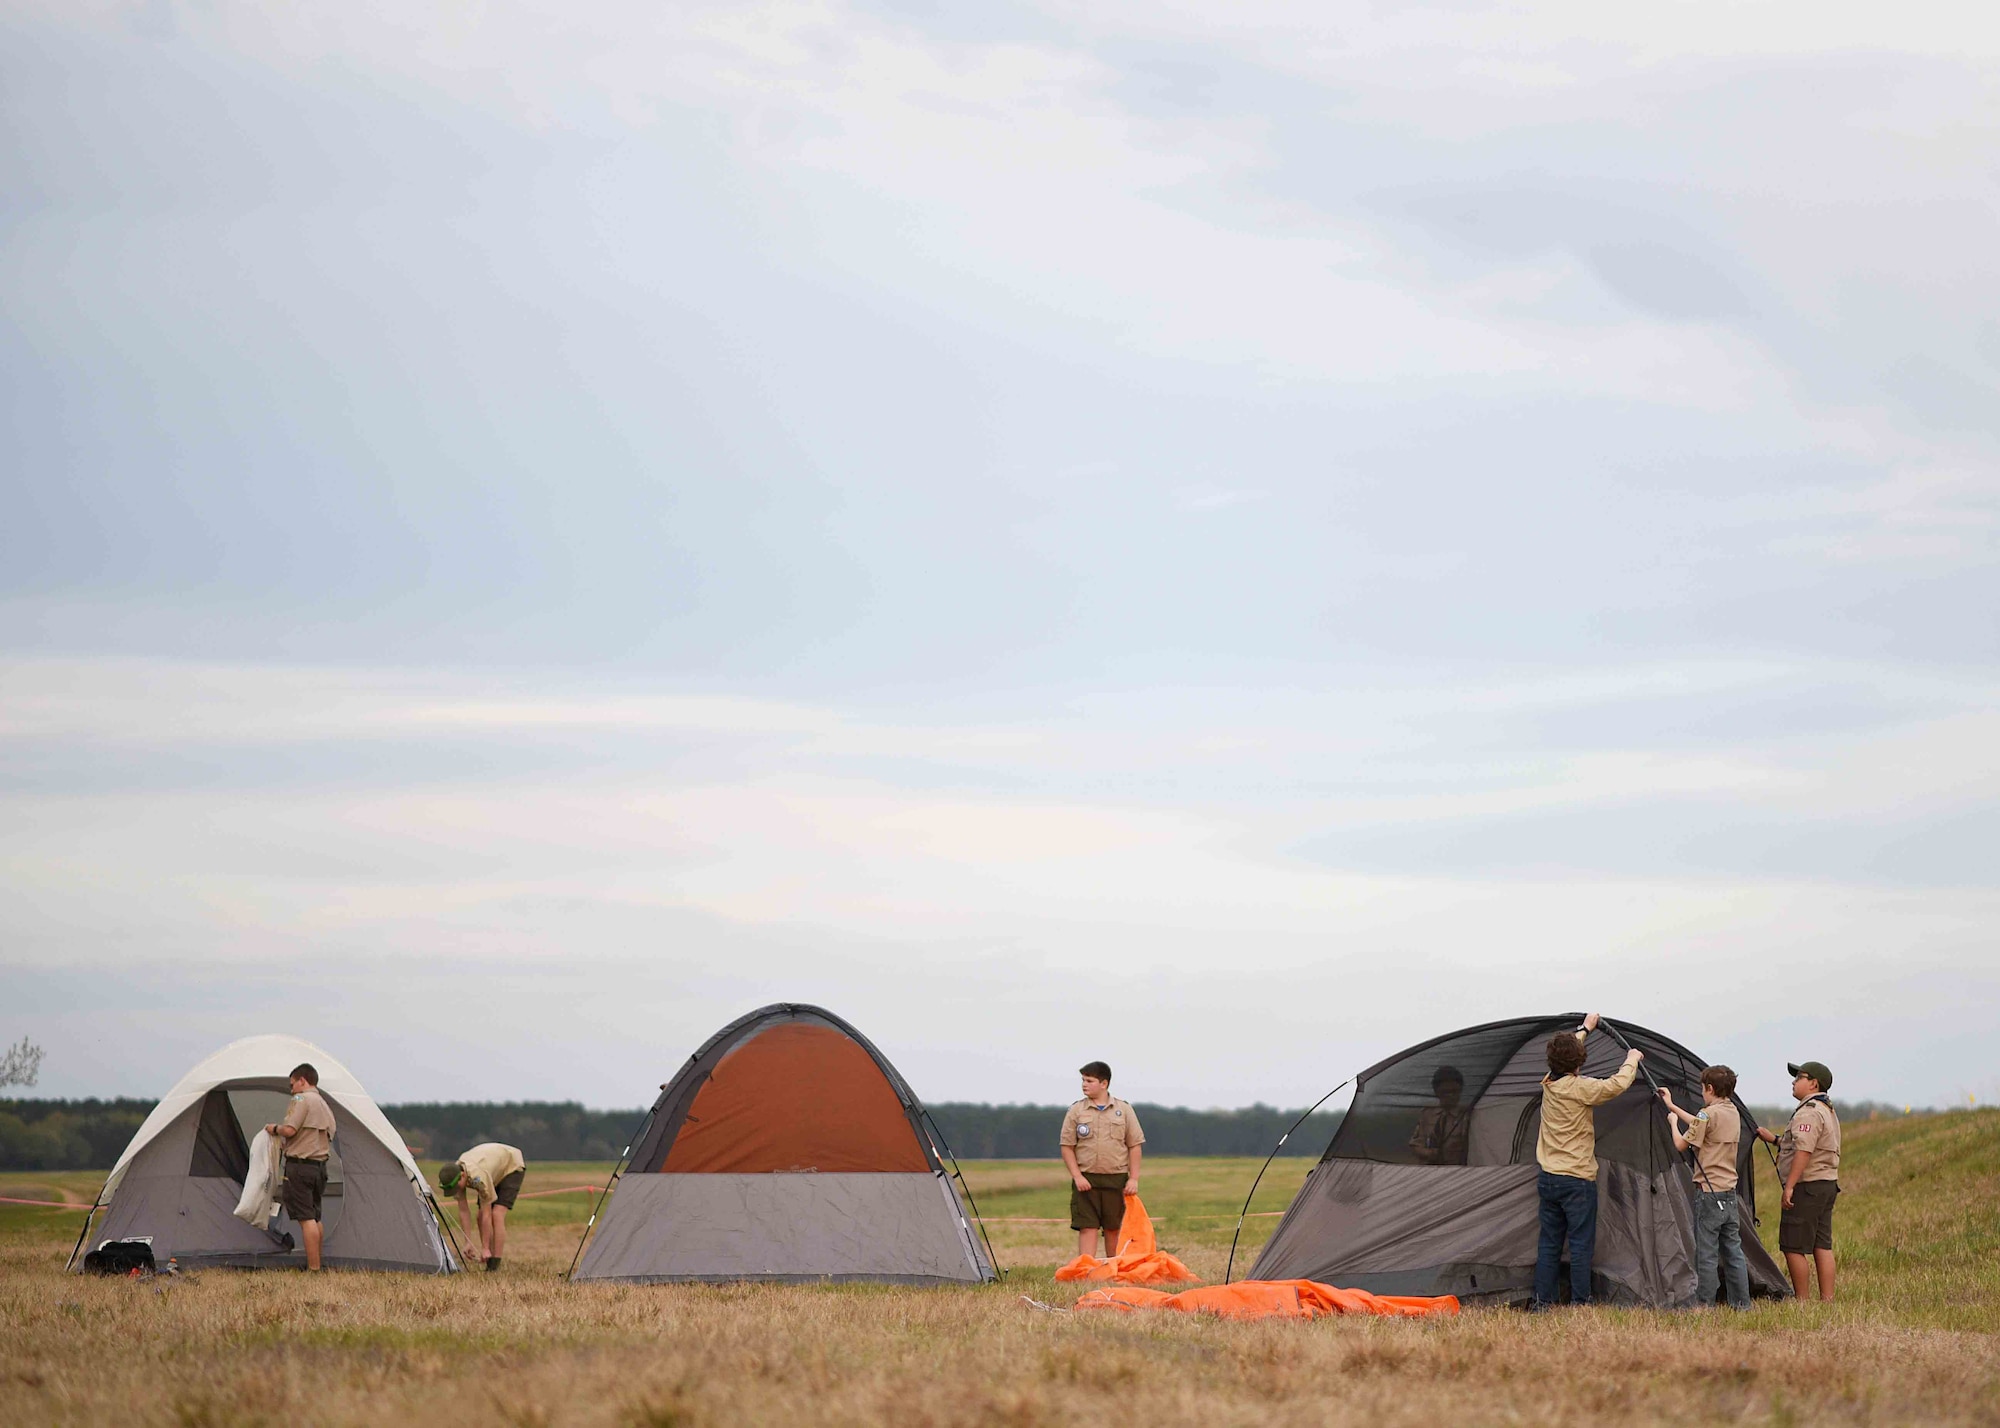 Scouts, Boy Scouts of America members pitch their tents March 29, 2019, on Columbus Air Force Base, Mississippi. Scouts from the local area spent three days and two nights on Columbus AFB camping and touring facilities. (U.S. Air Force photo by Airman 1st Class Keith Holcomb)